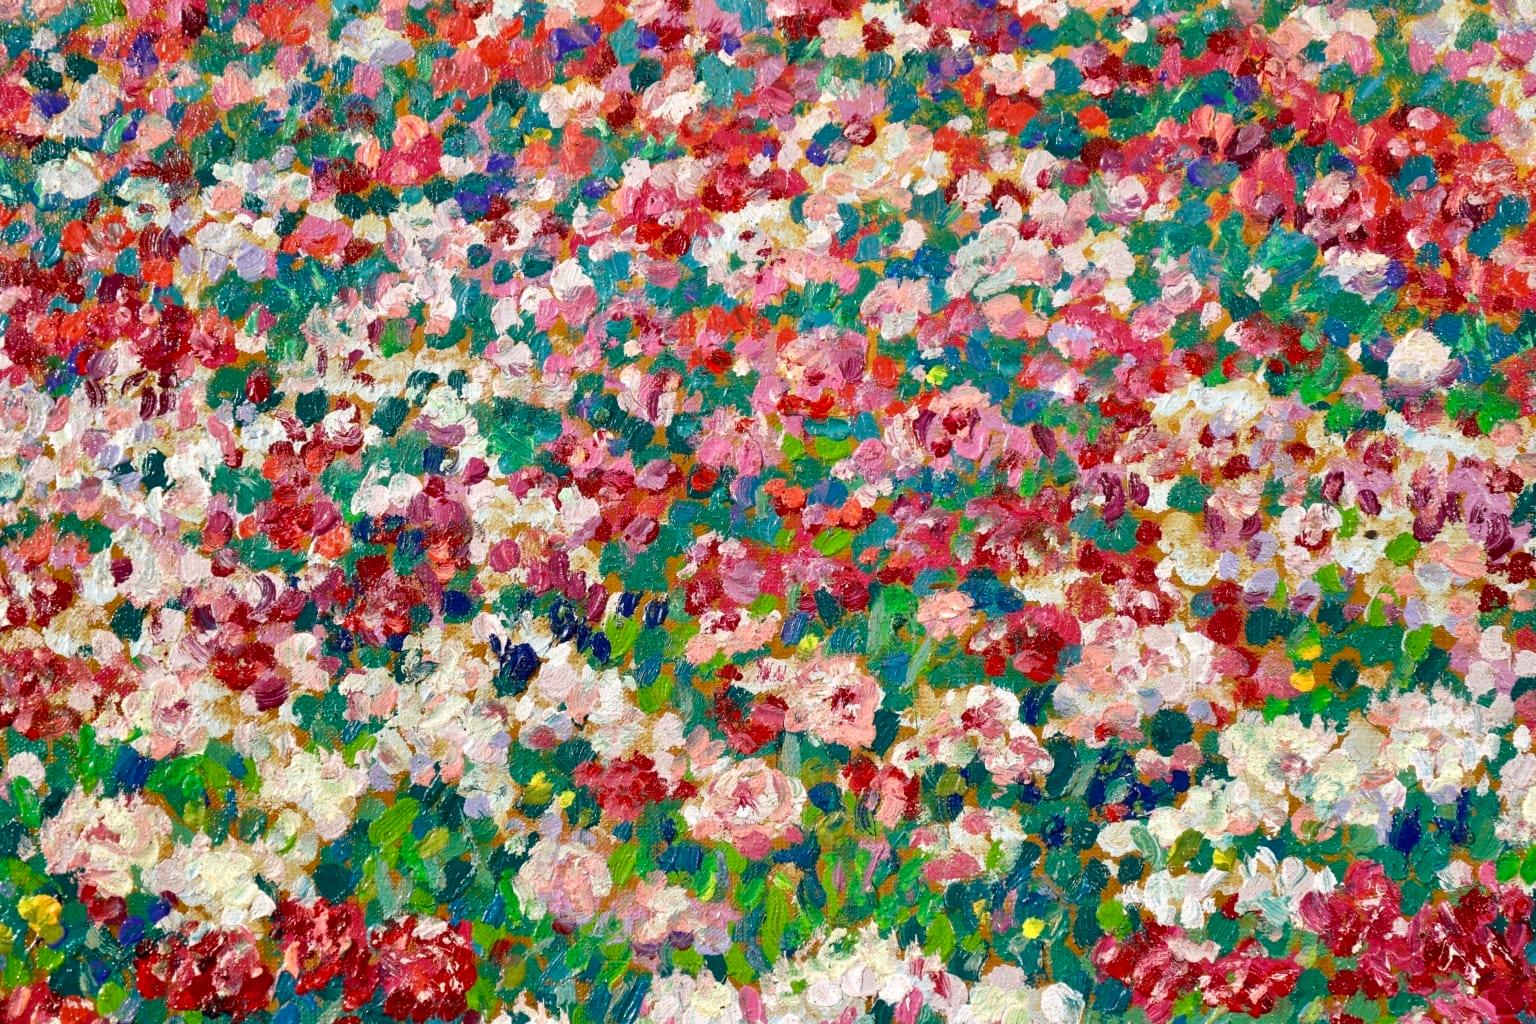 Field of Flowers - Post Impressionist Oil, Landscape Oil by J Martin-Ferrieres 7